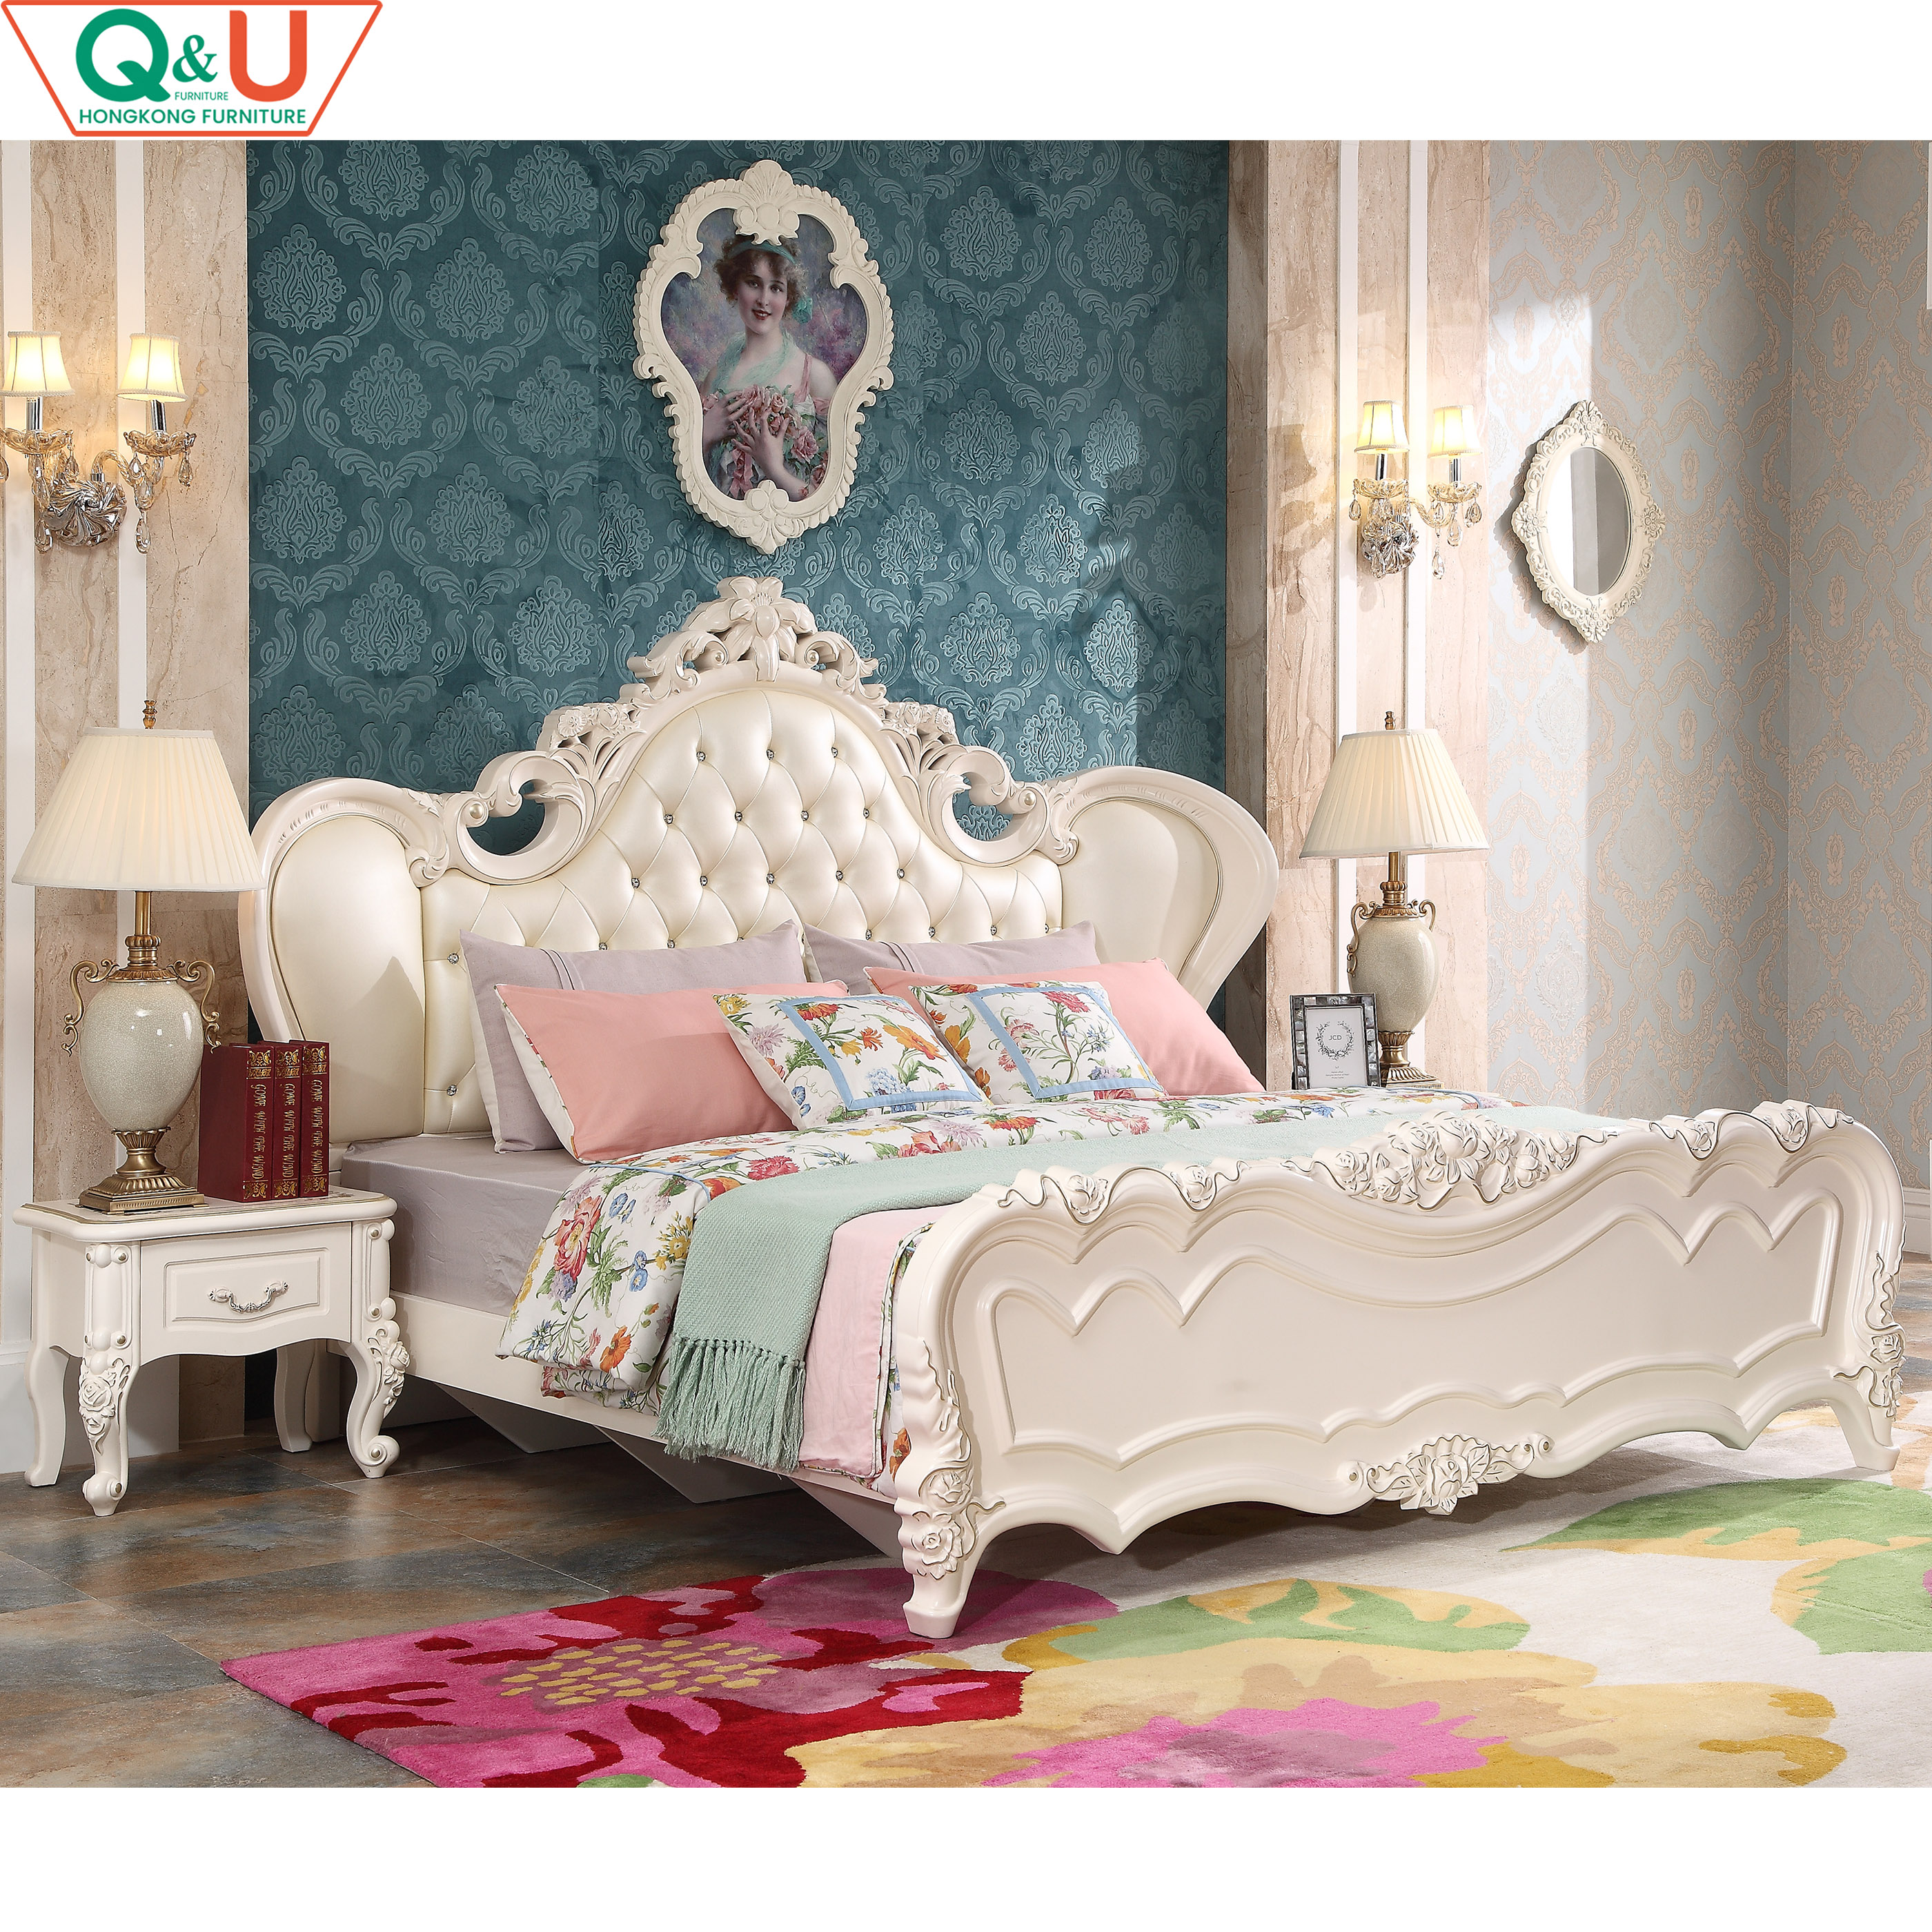 product-details-of-quanu-l-7feet-w-6feet-royal-design-king-size-bed-without-side-box-61201